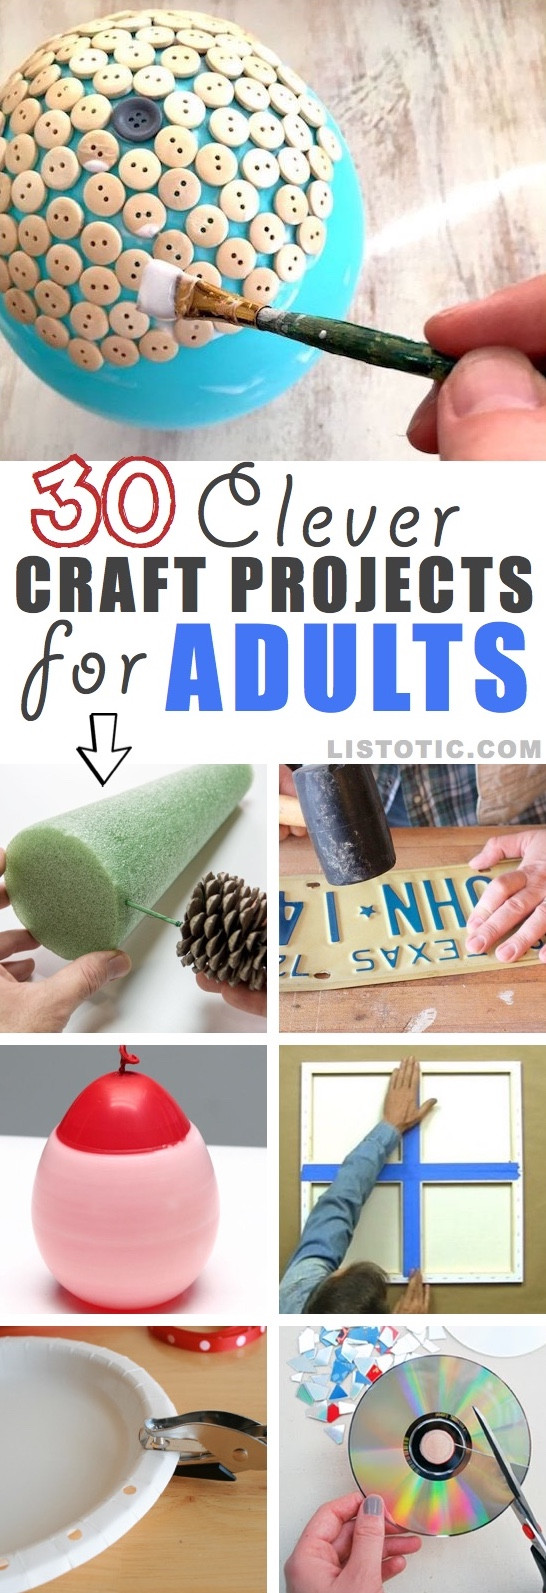 Easy Craft Ideas For Adults
 30 Easy Craft Ideas That Will Spark Your Creativity DIY